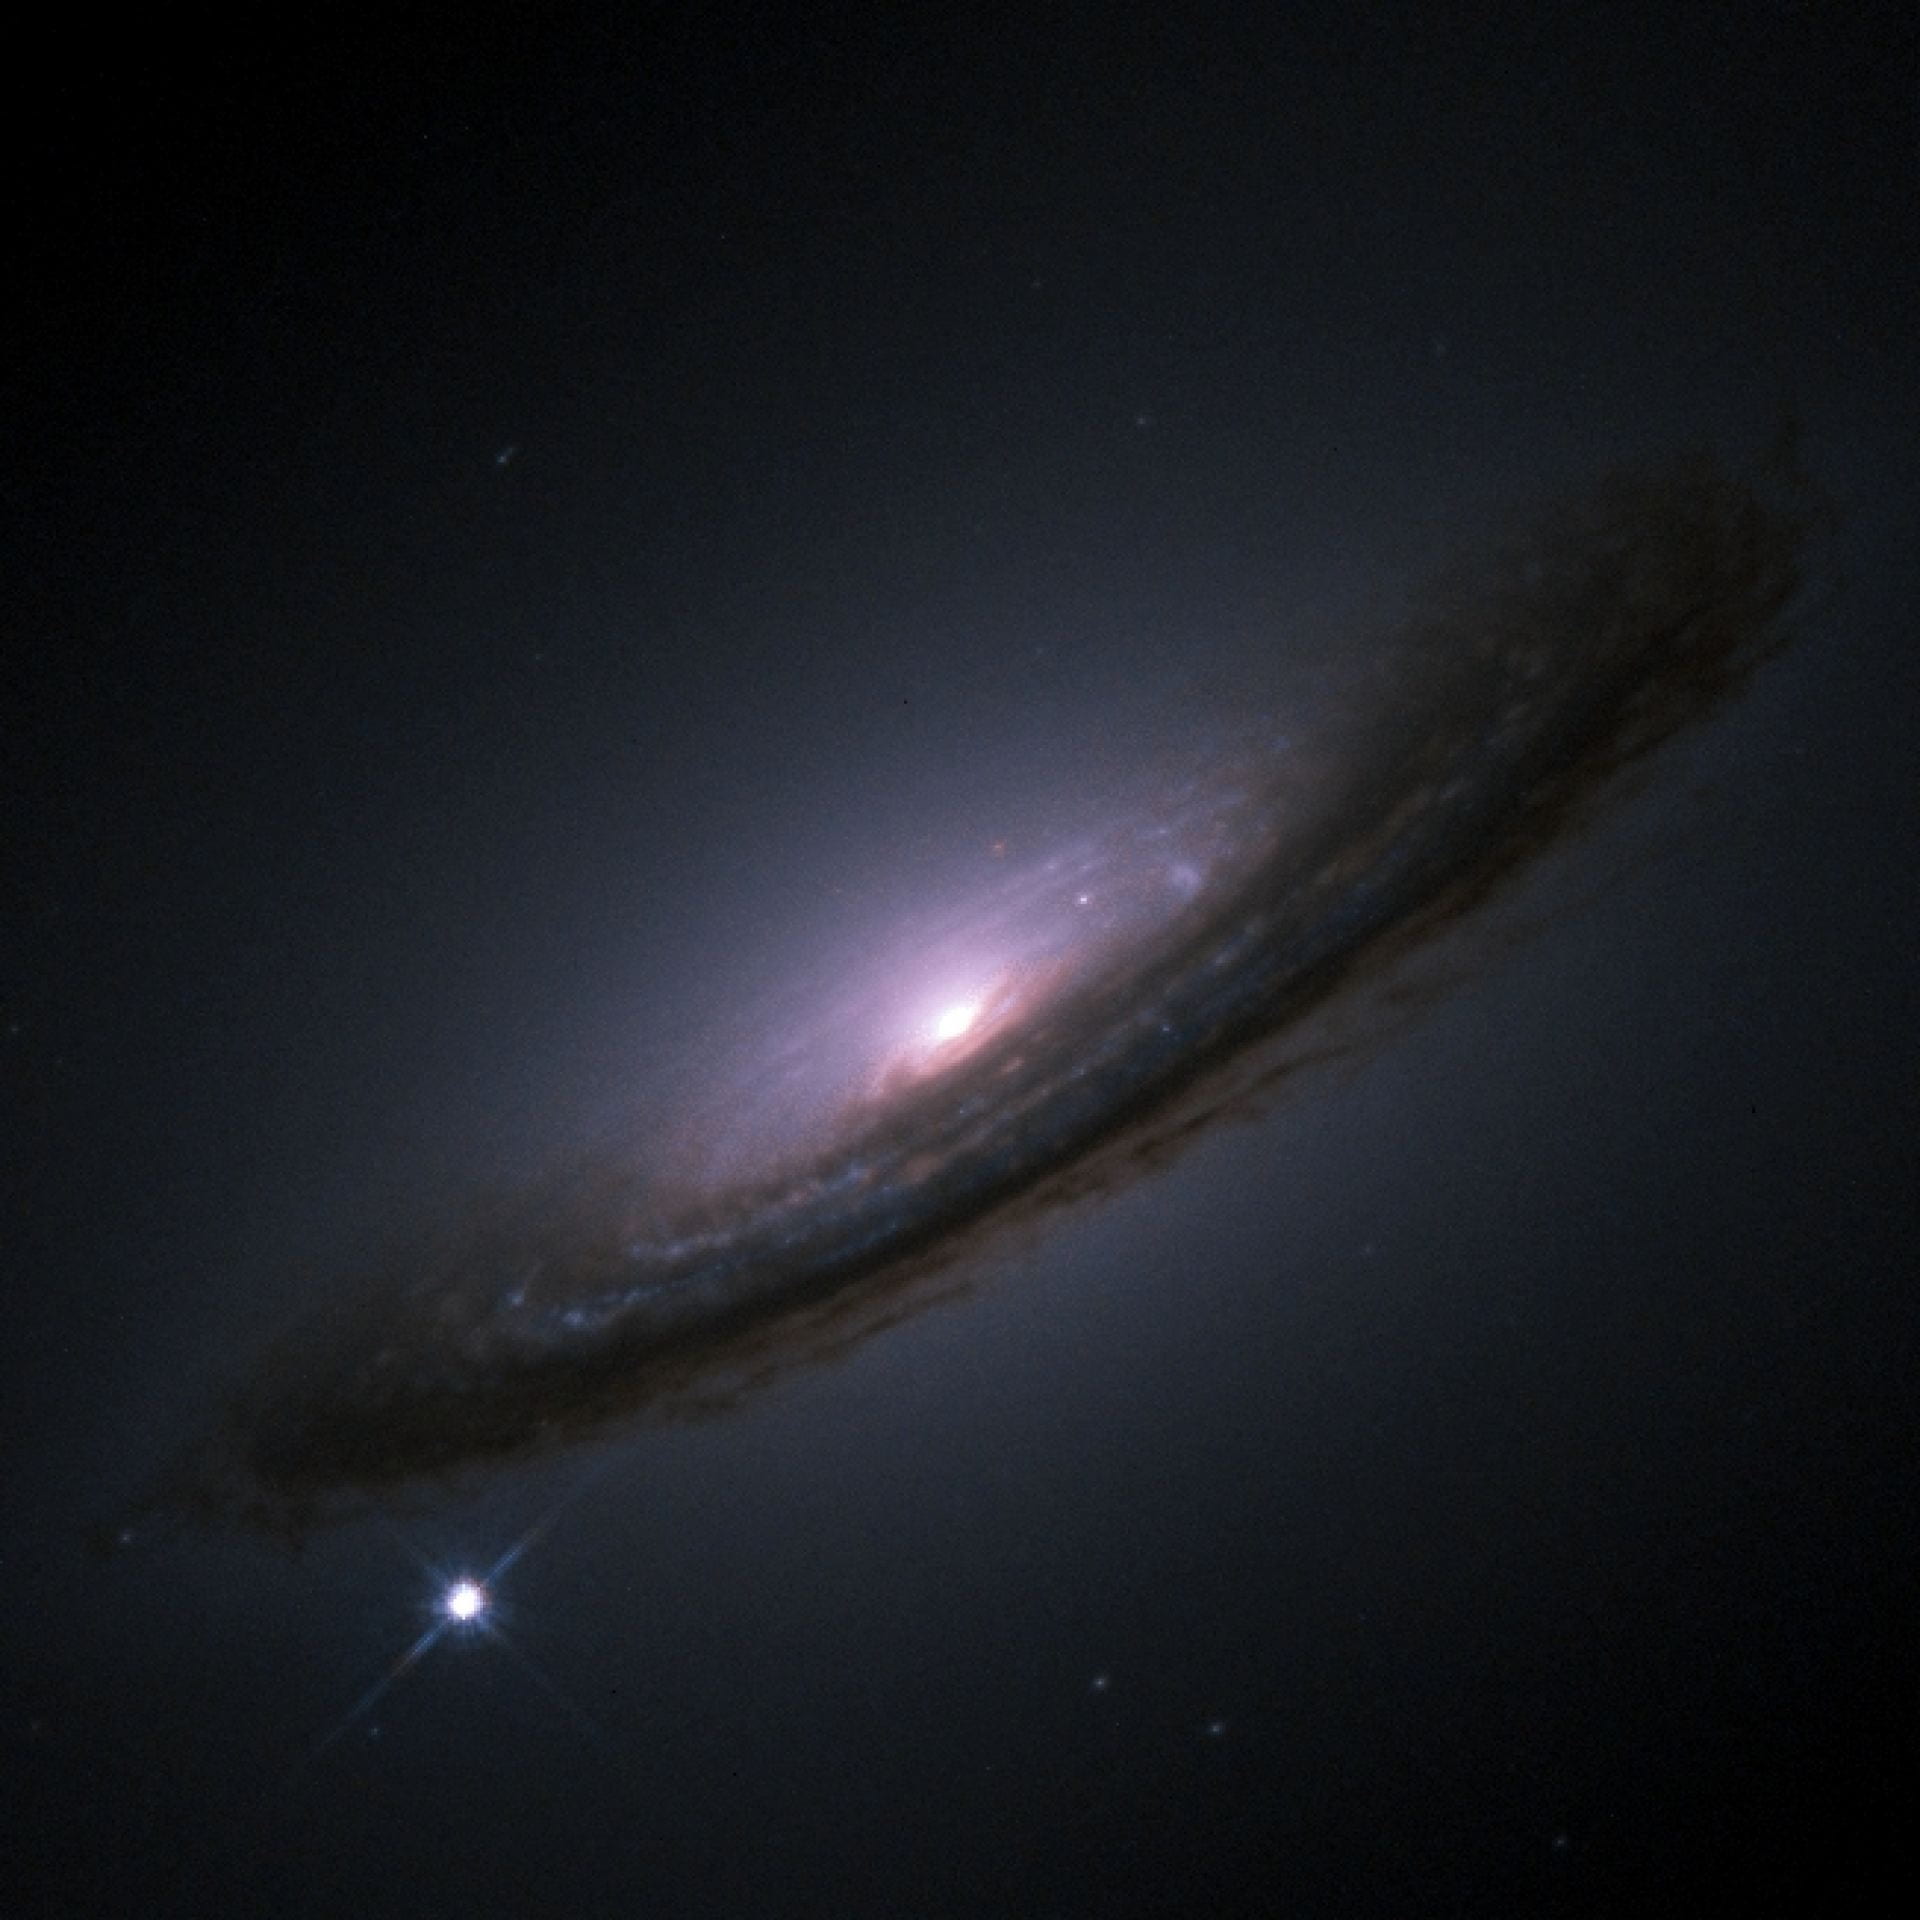 A disk galaxy is seen side-on like a dusty frisbee. Dark clouds are seen against a dark background with a purple glow coming out from the center of the disk. In the lower left, a bright white dot shines.